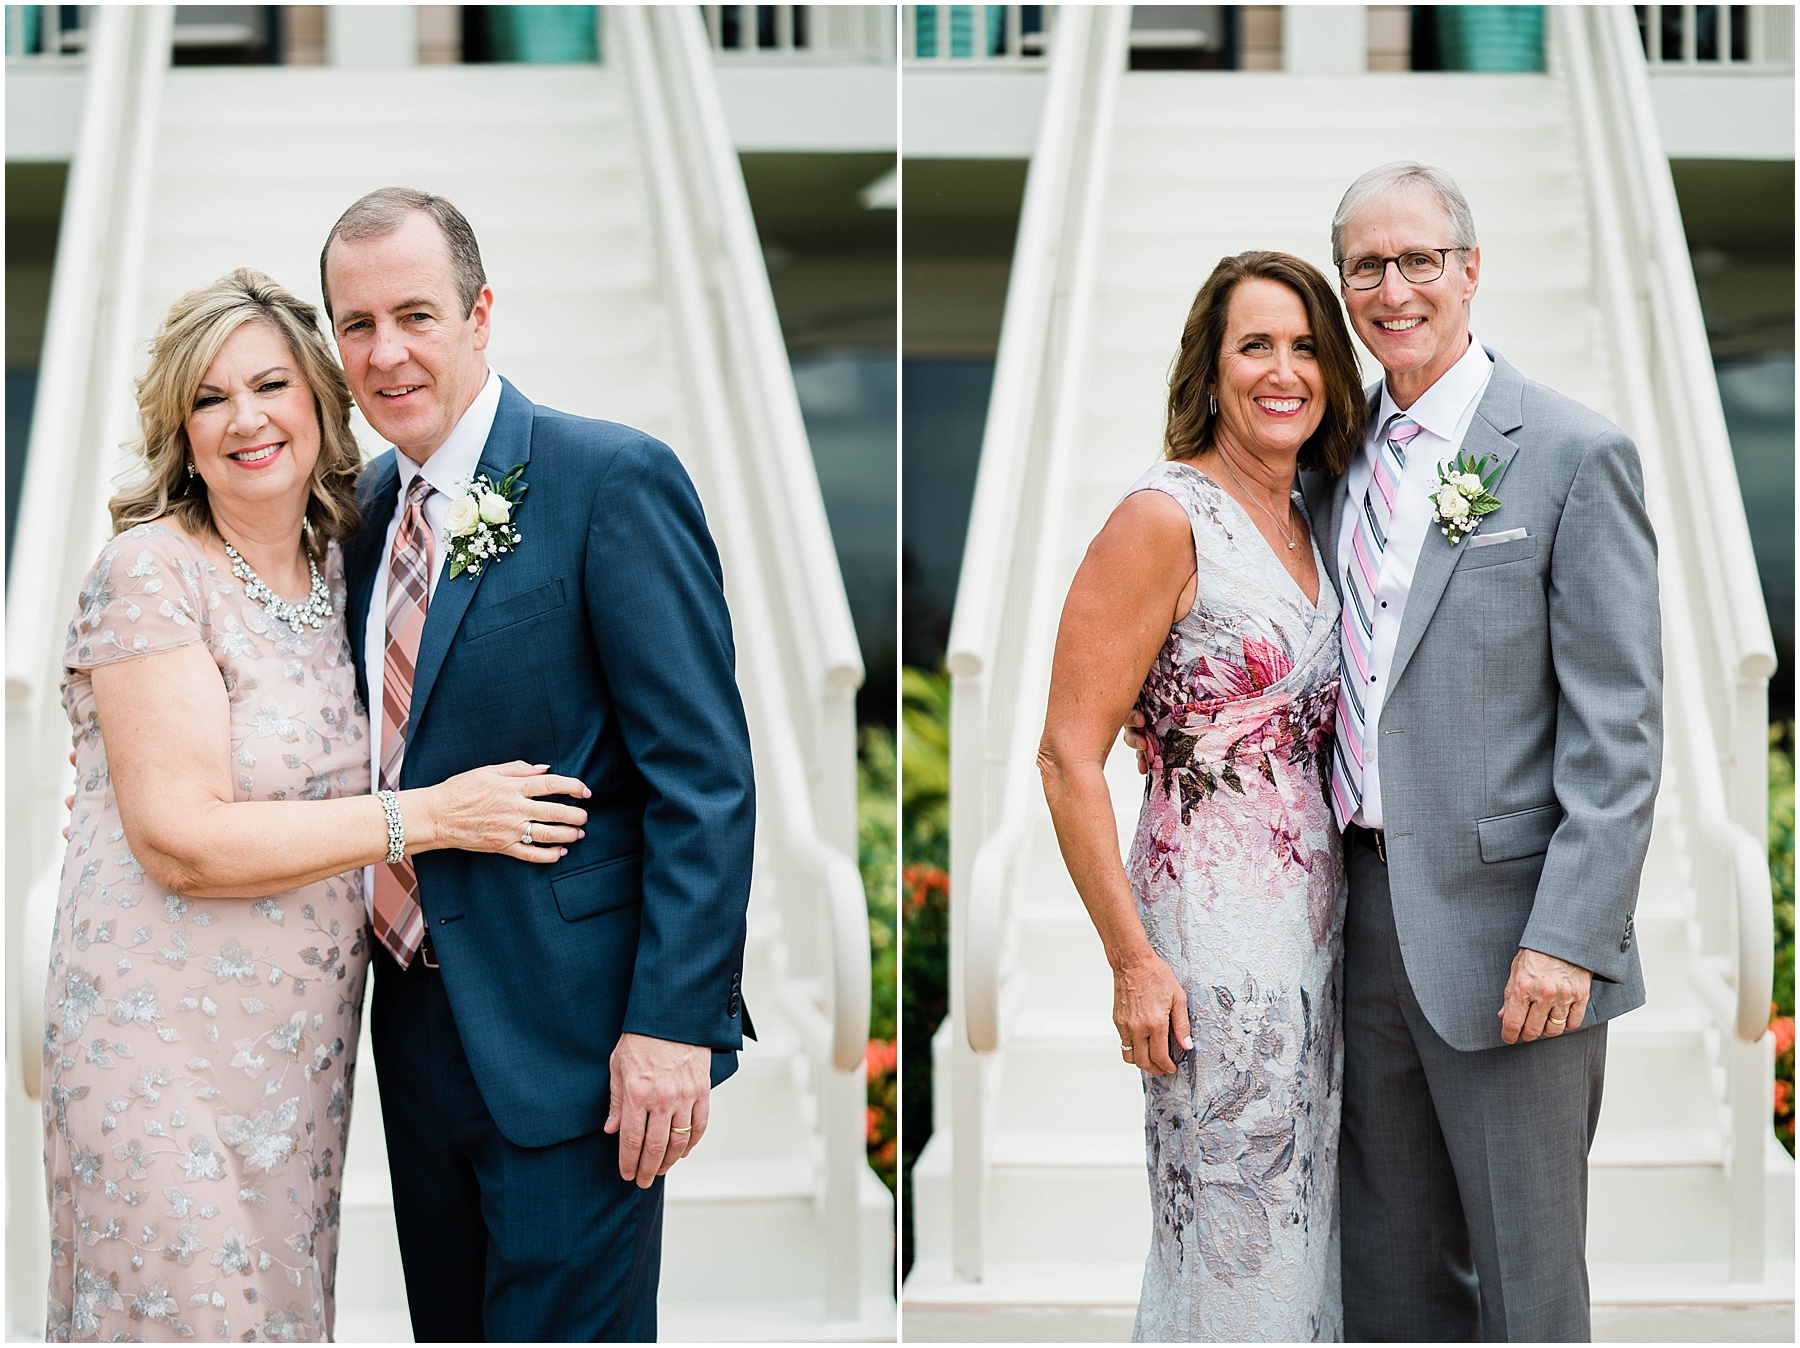 Parents of the bride and groom smile on wedding day at JW Marriott Marco Island in Florida.